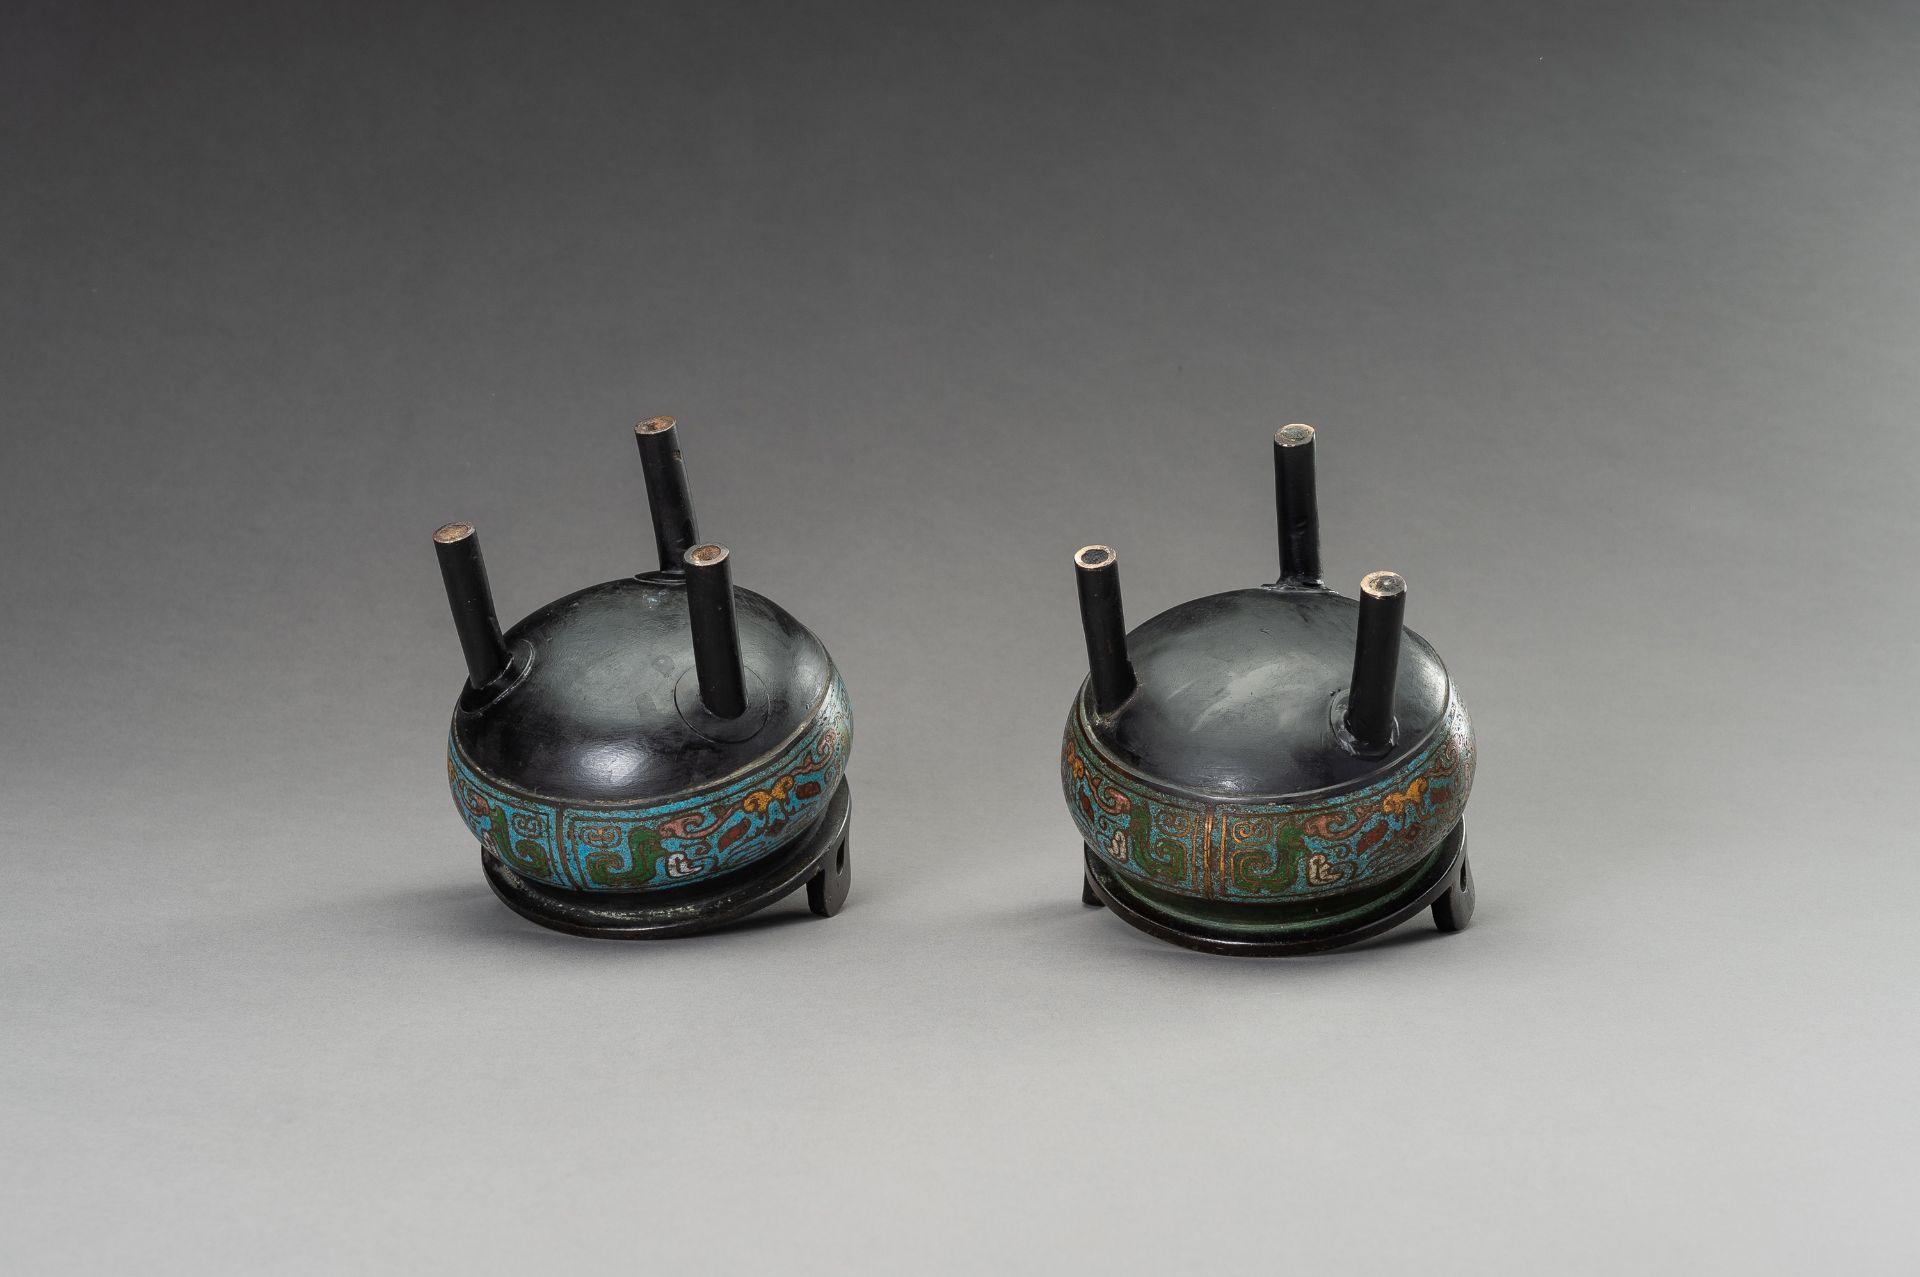 A PAIR OF CHAMPLEVE ENAMEL BRONZE TRIPOD CENSERS, QING DYNASTY - Image 9 of 9